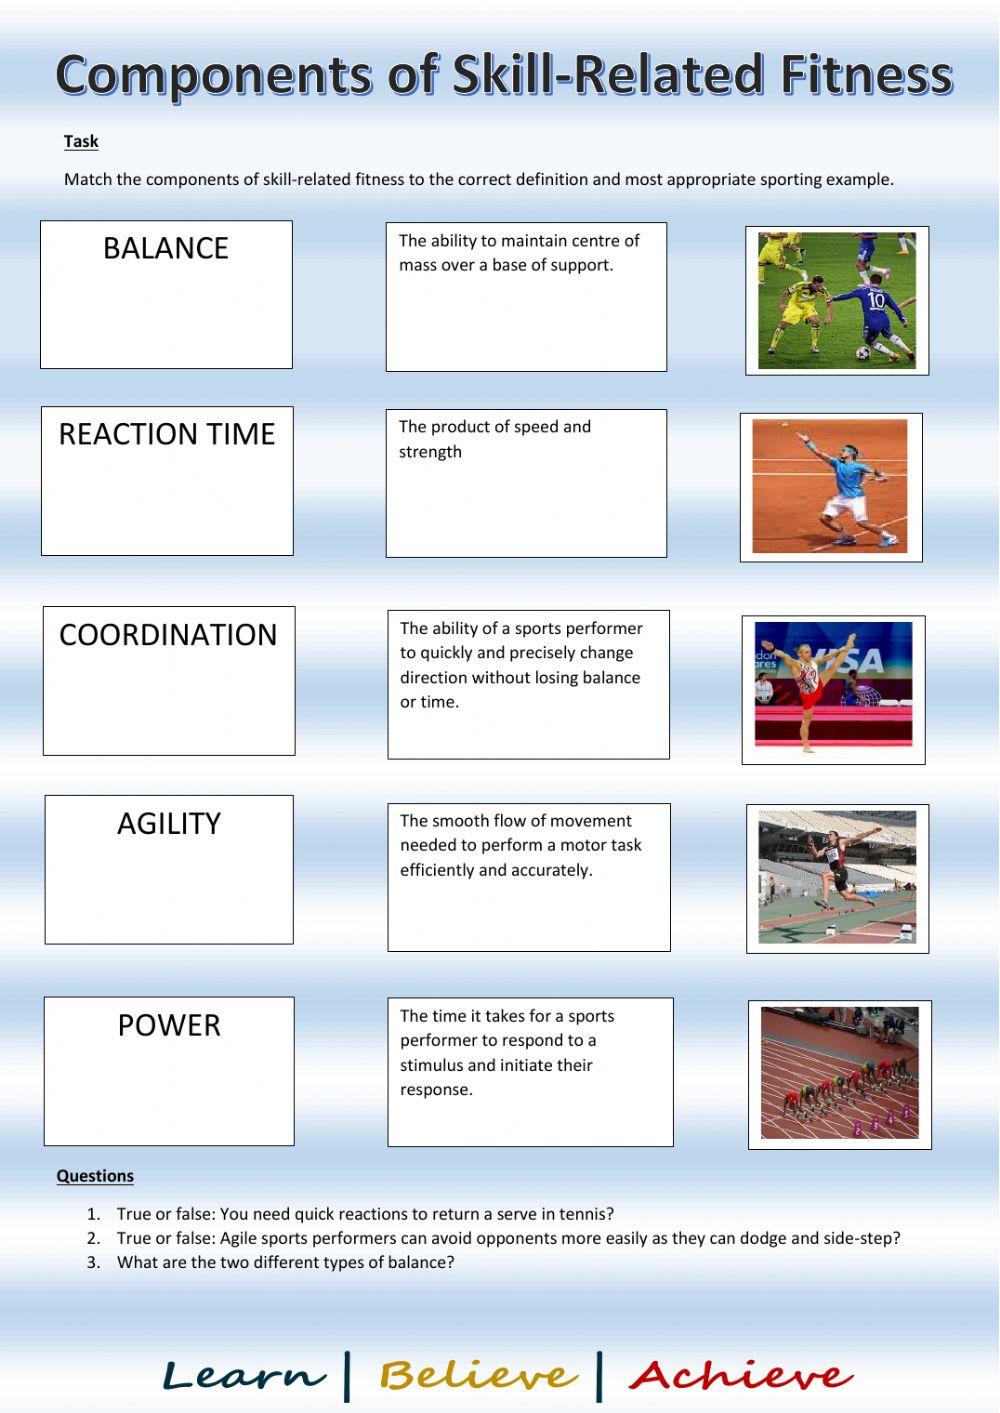 Components of skill-related fitness worksheet | Live Worksheets